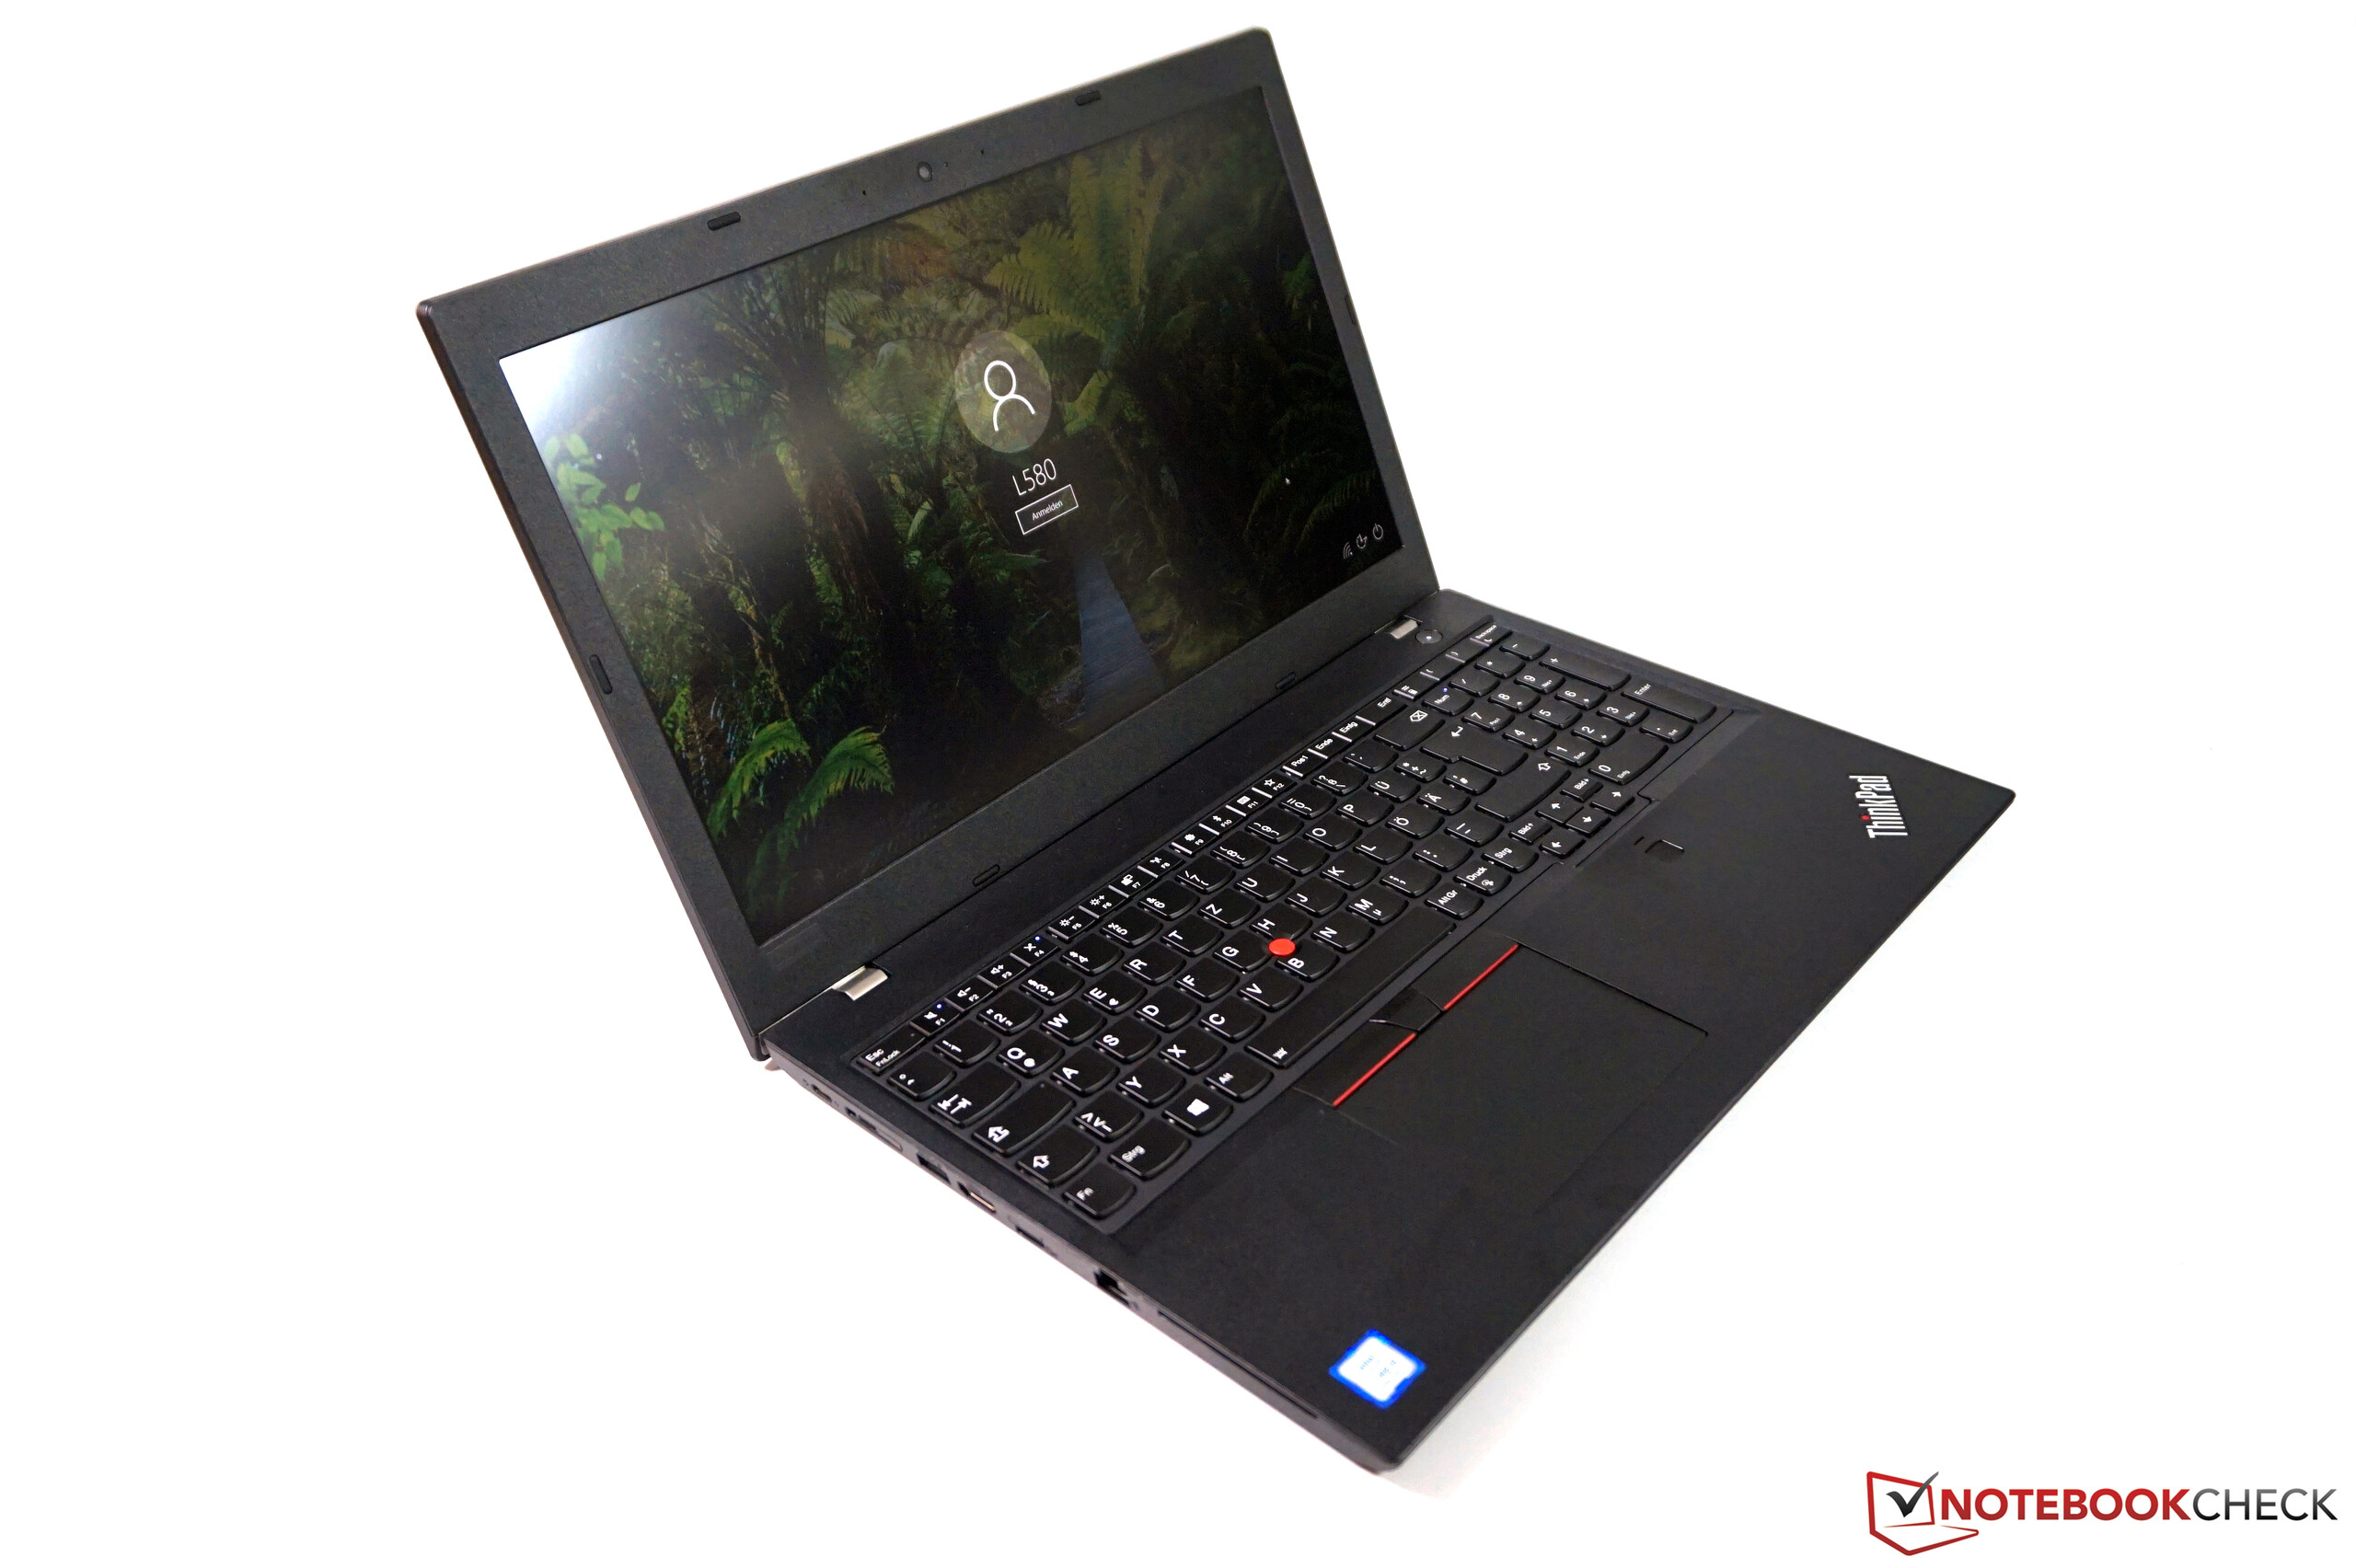 Lenovo ThinkPad L580 Laptop Review: Reliable office notebook with 